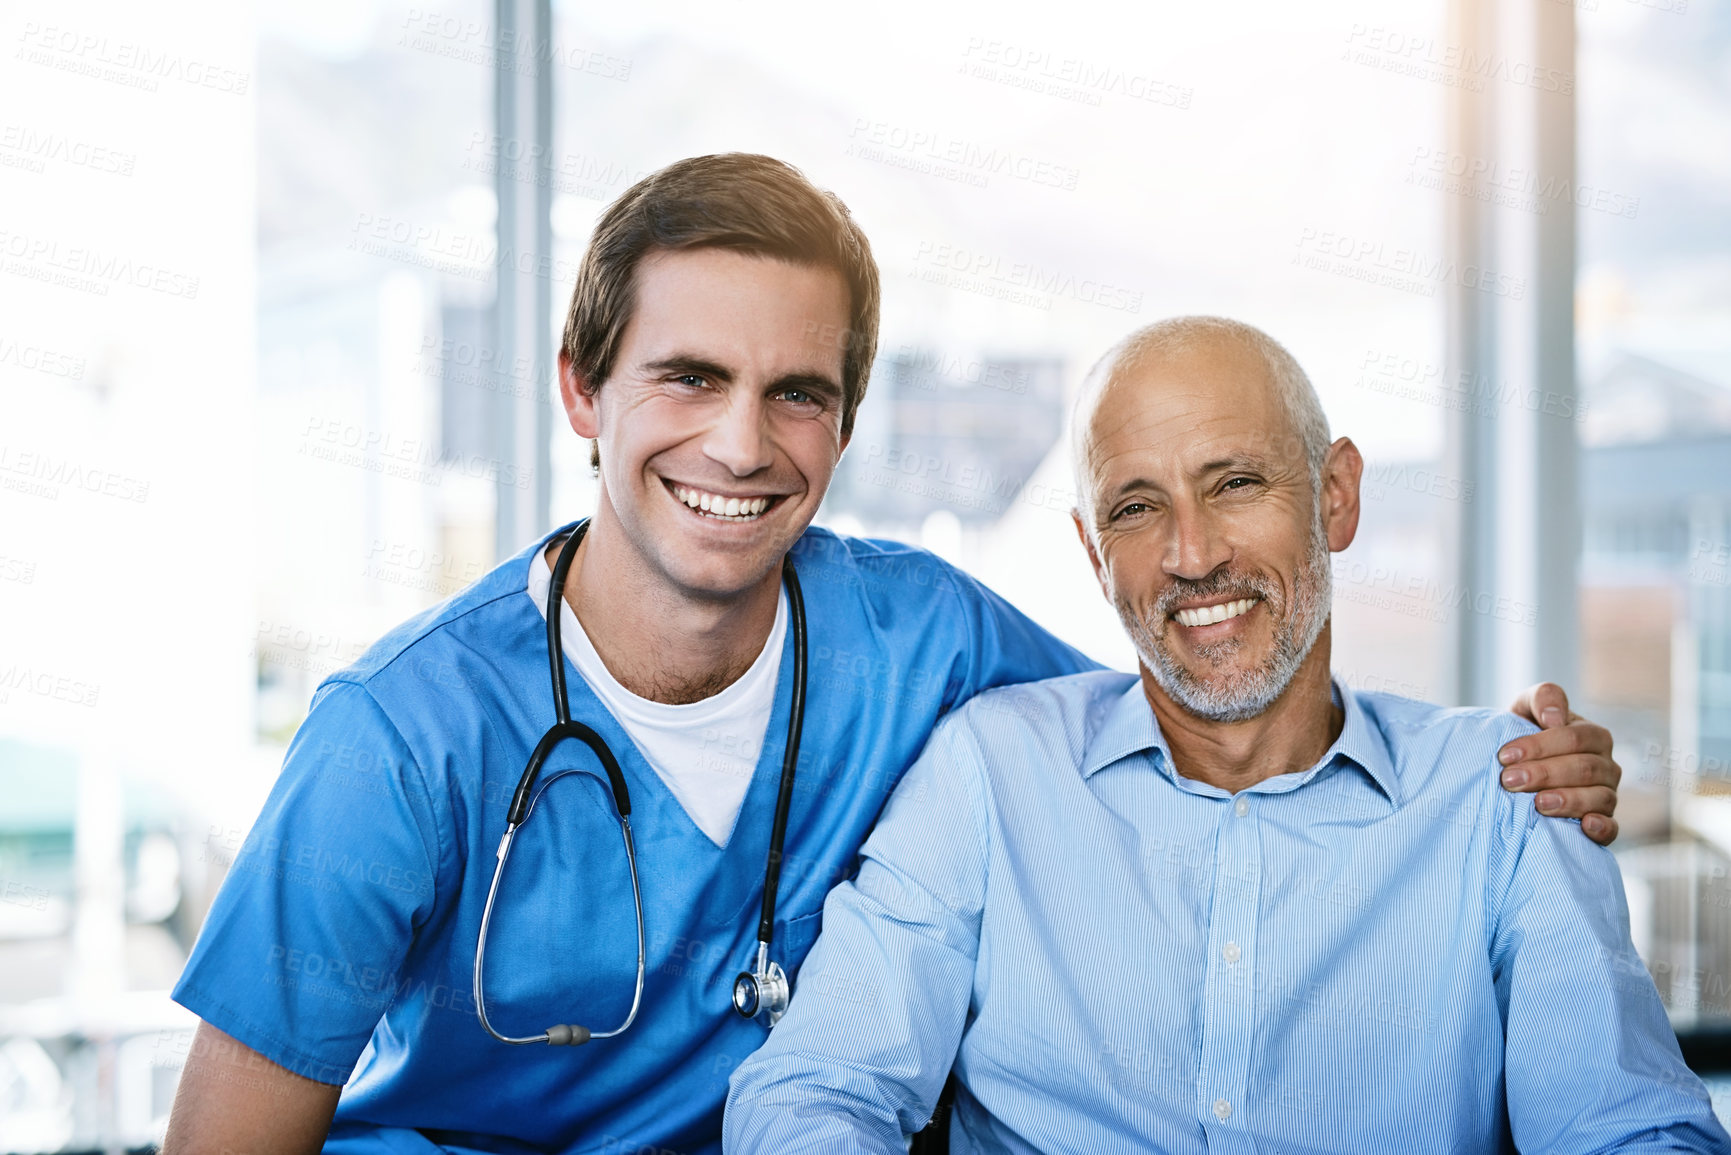 Buy stock photo Portrait of a male nurse caring for a senior patient